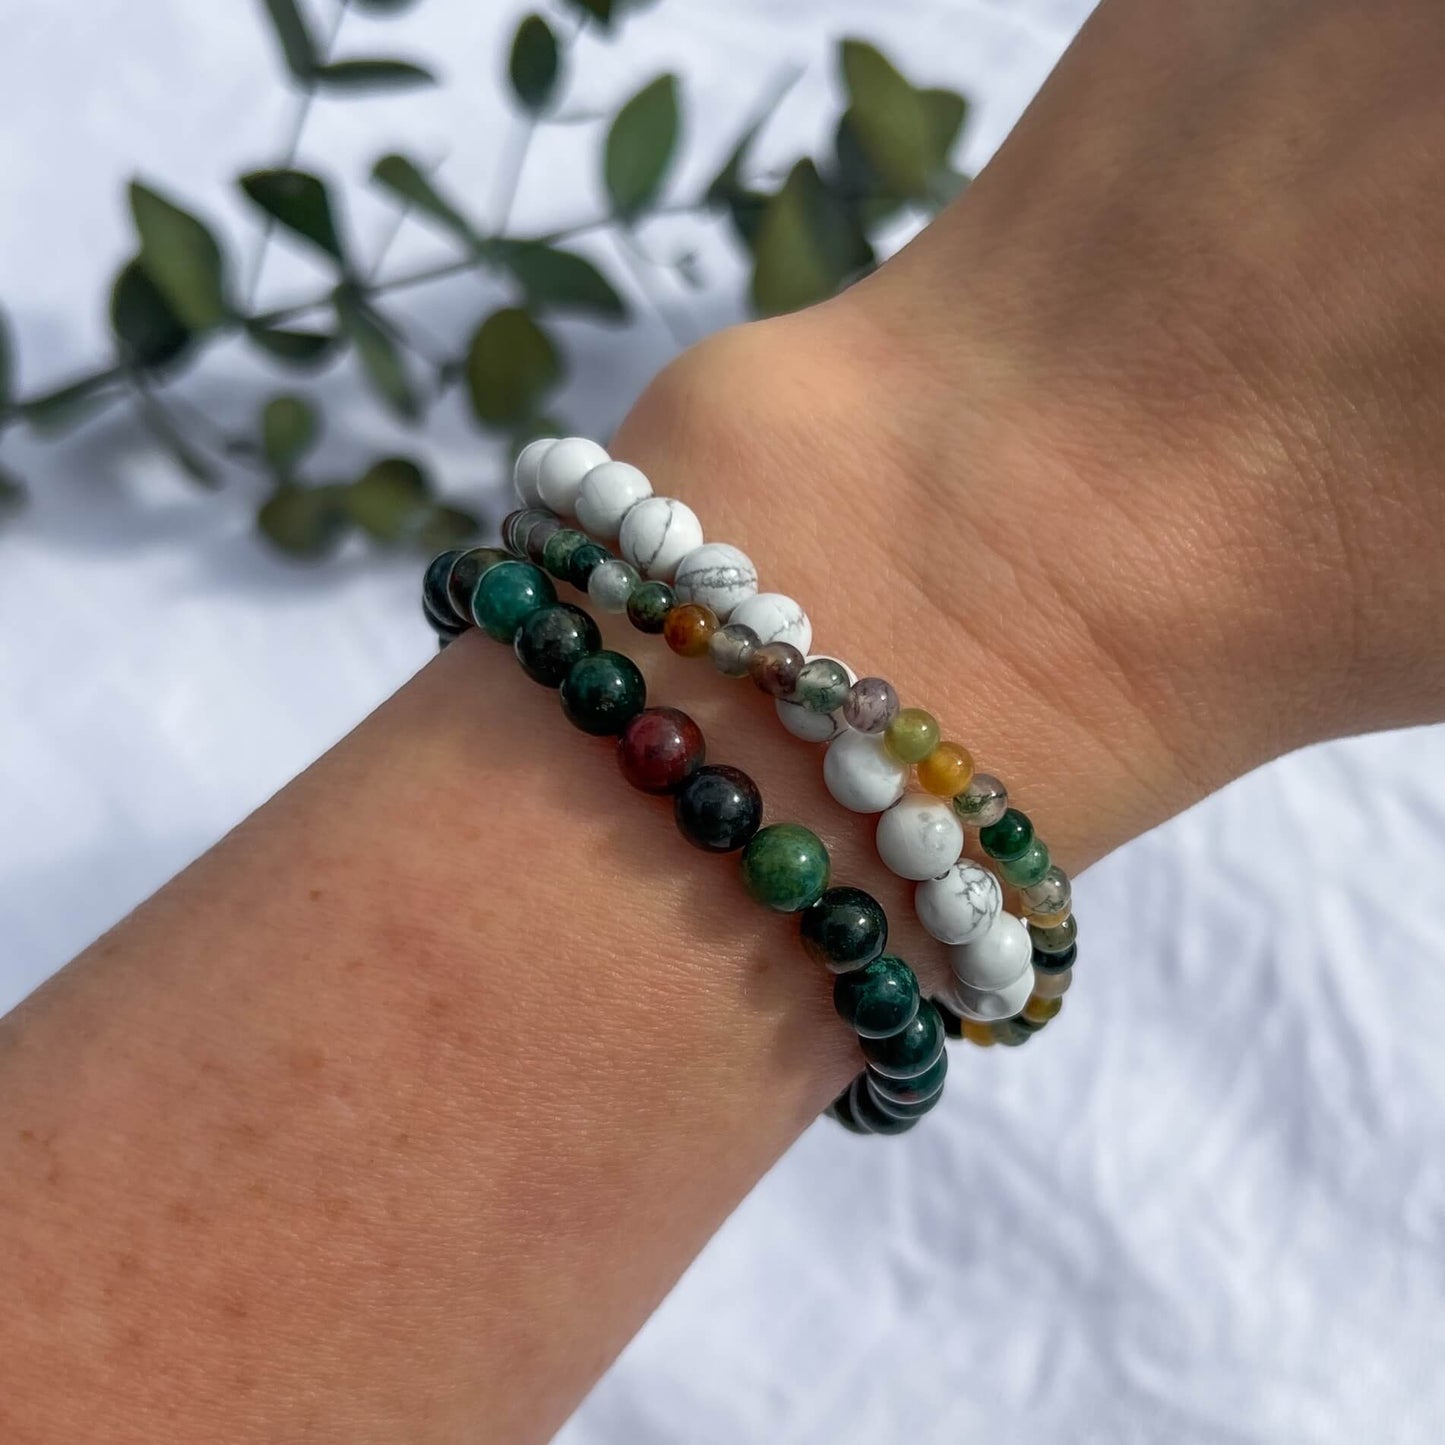 A lady's wrist with calming white & green crystal bead bracelets in howlite, green jasper and bloodstone